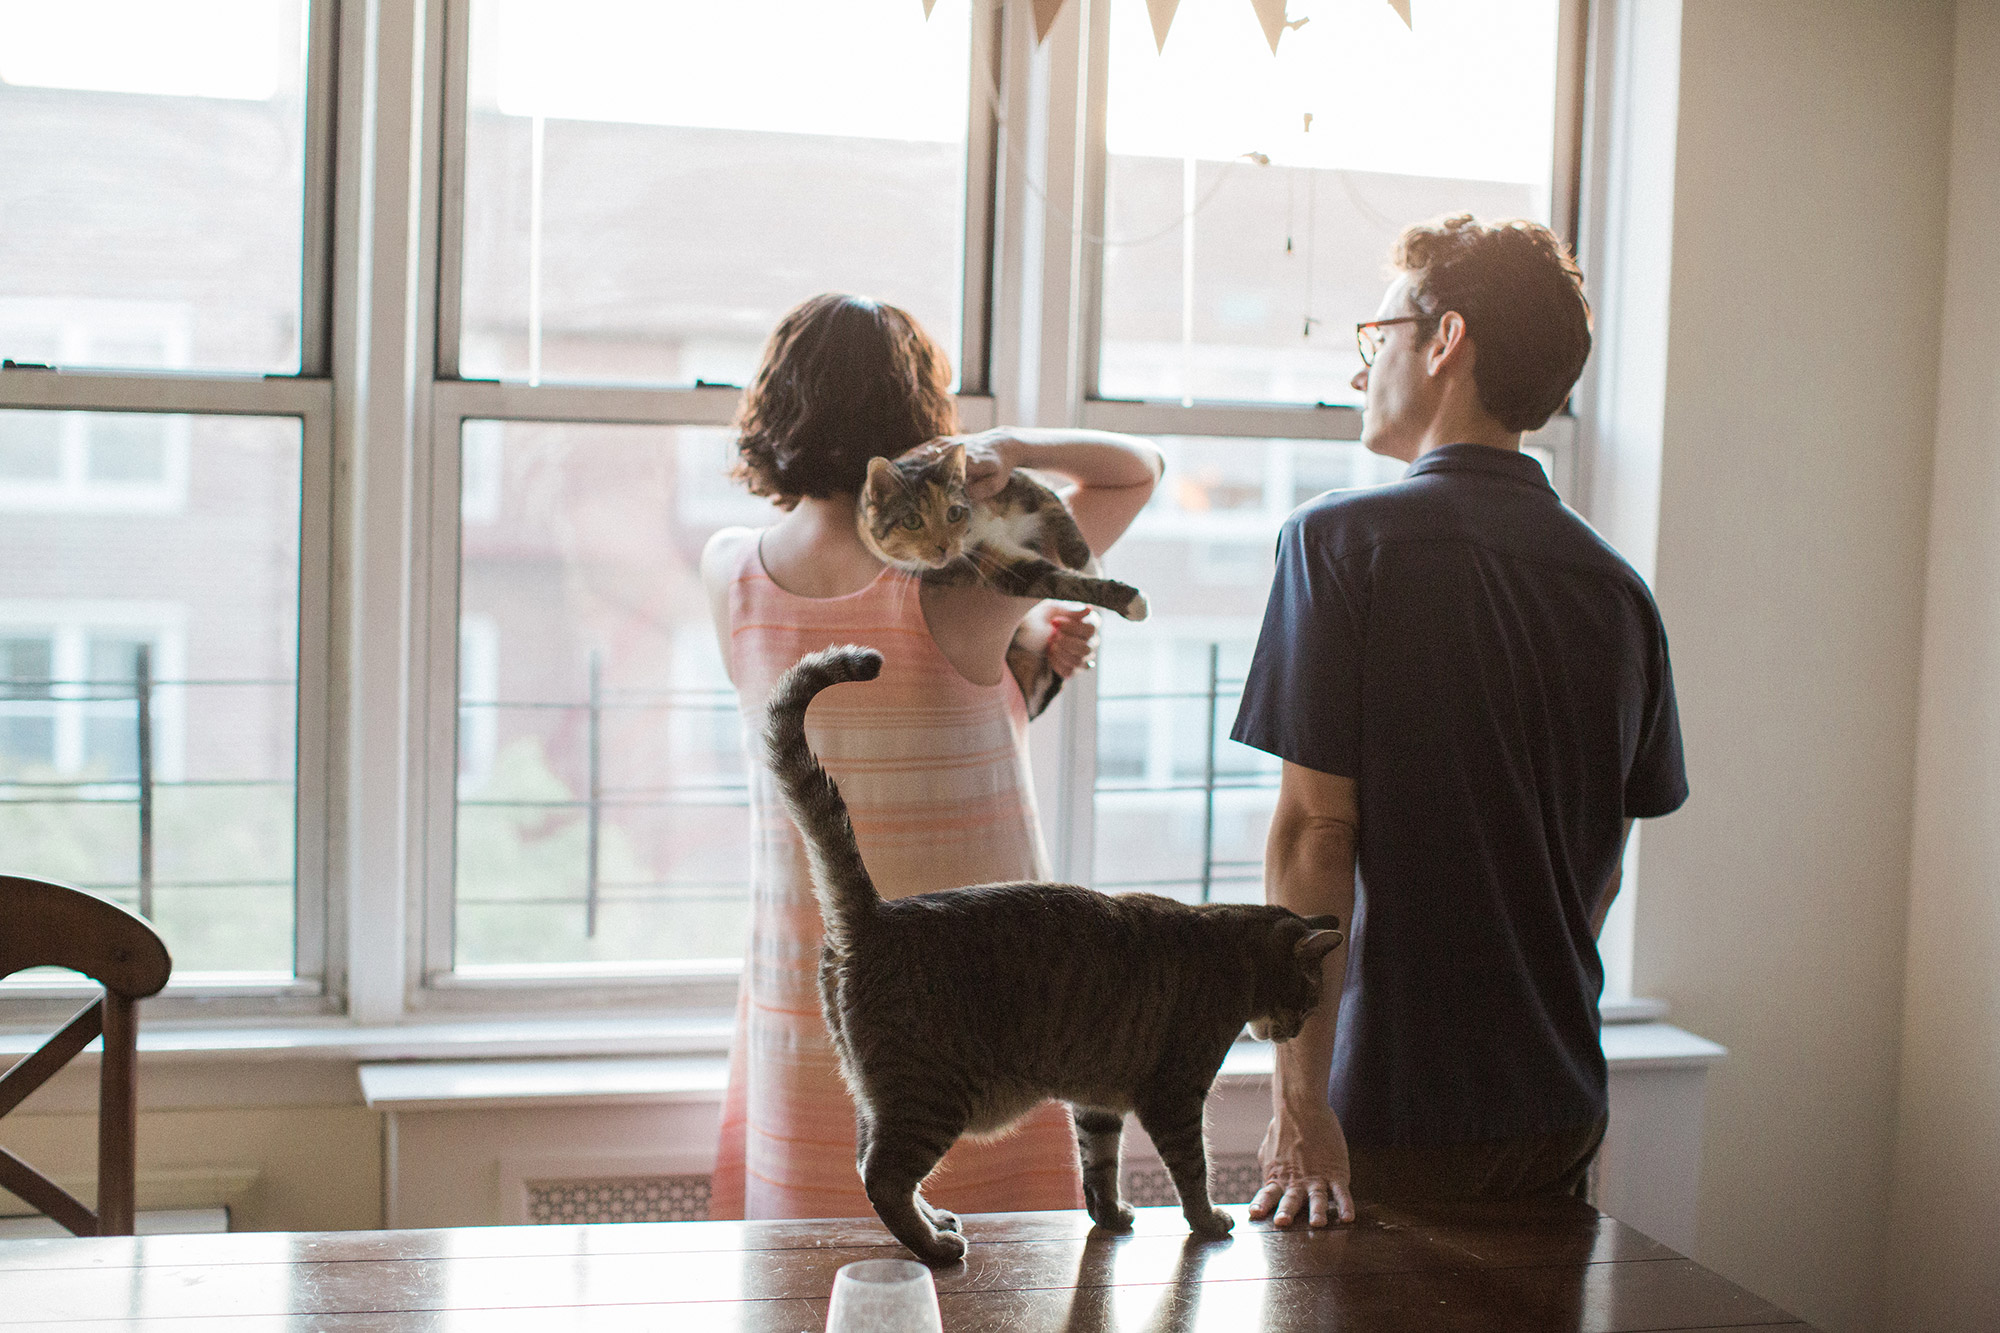 Audrey and Peter's baby bump photos in Brooklyn.  Photos by Kelly Kollar Photography.